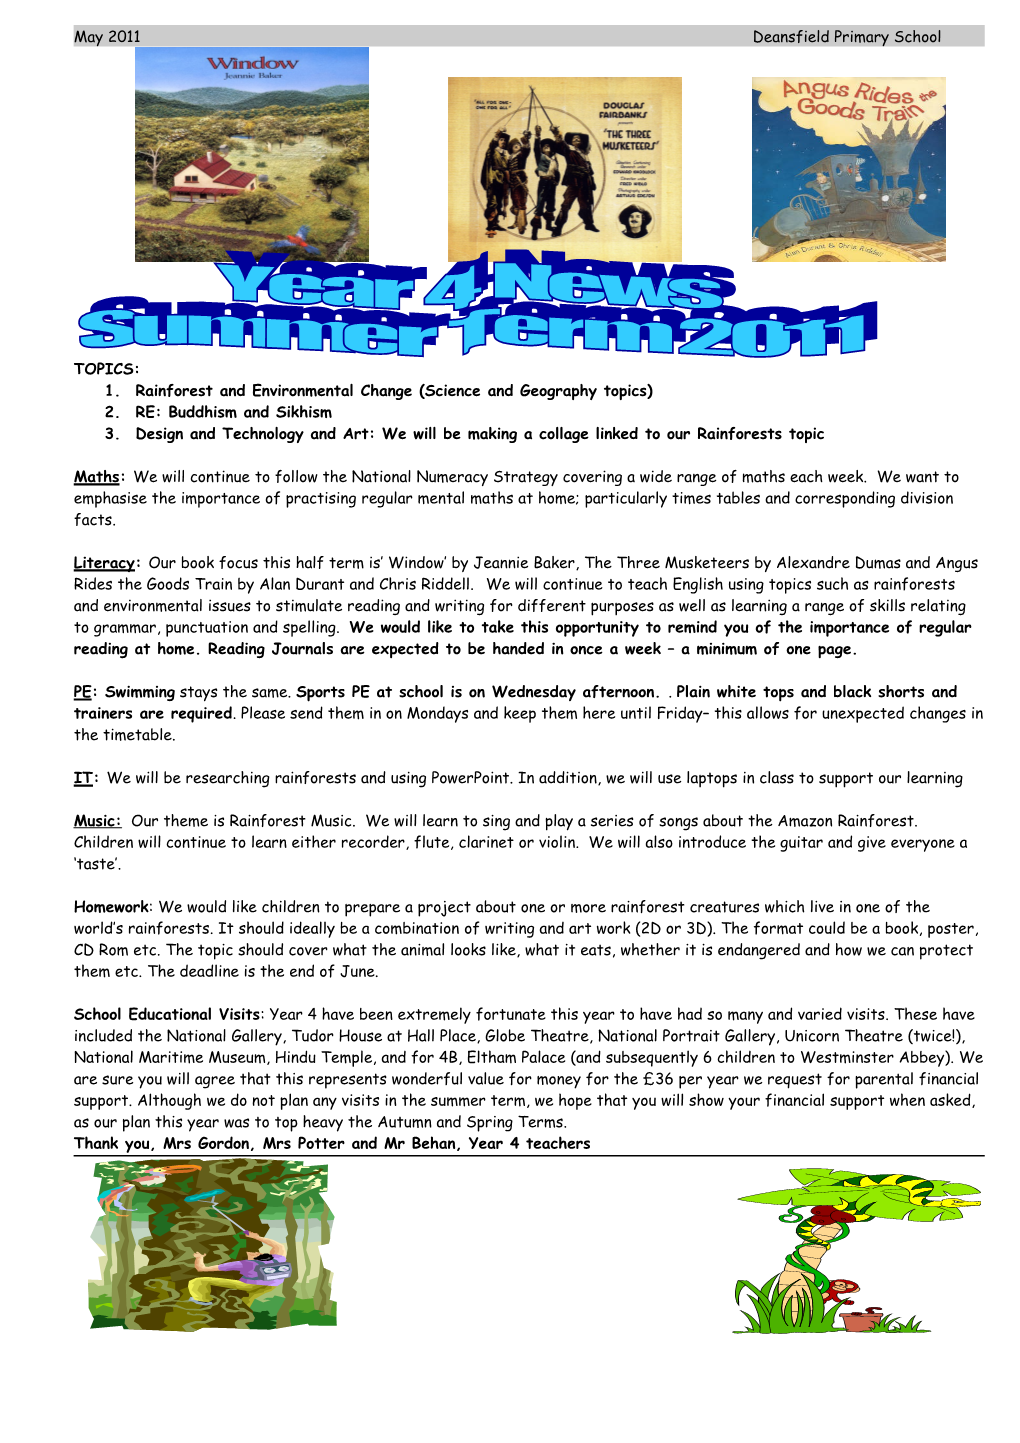 Rainforest and Environmental Change (Science and Geography Topics)